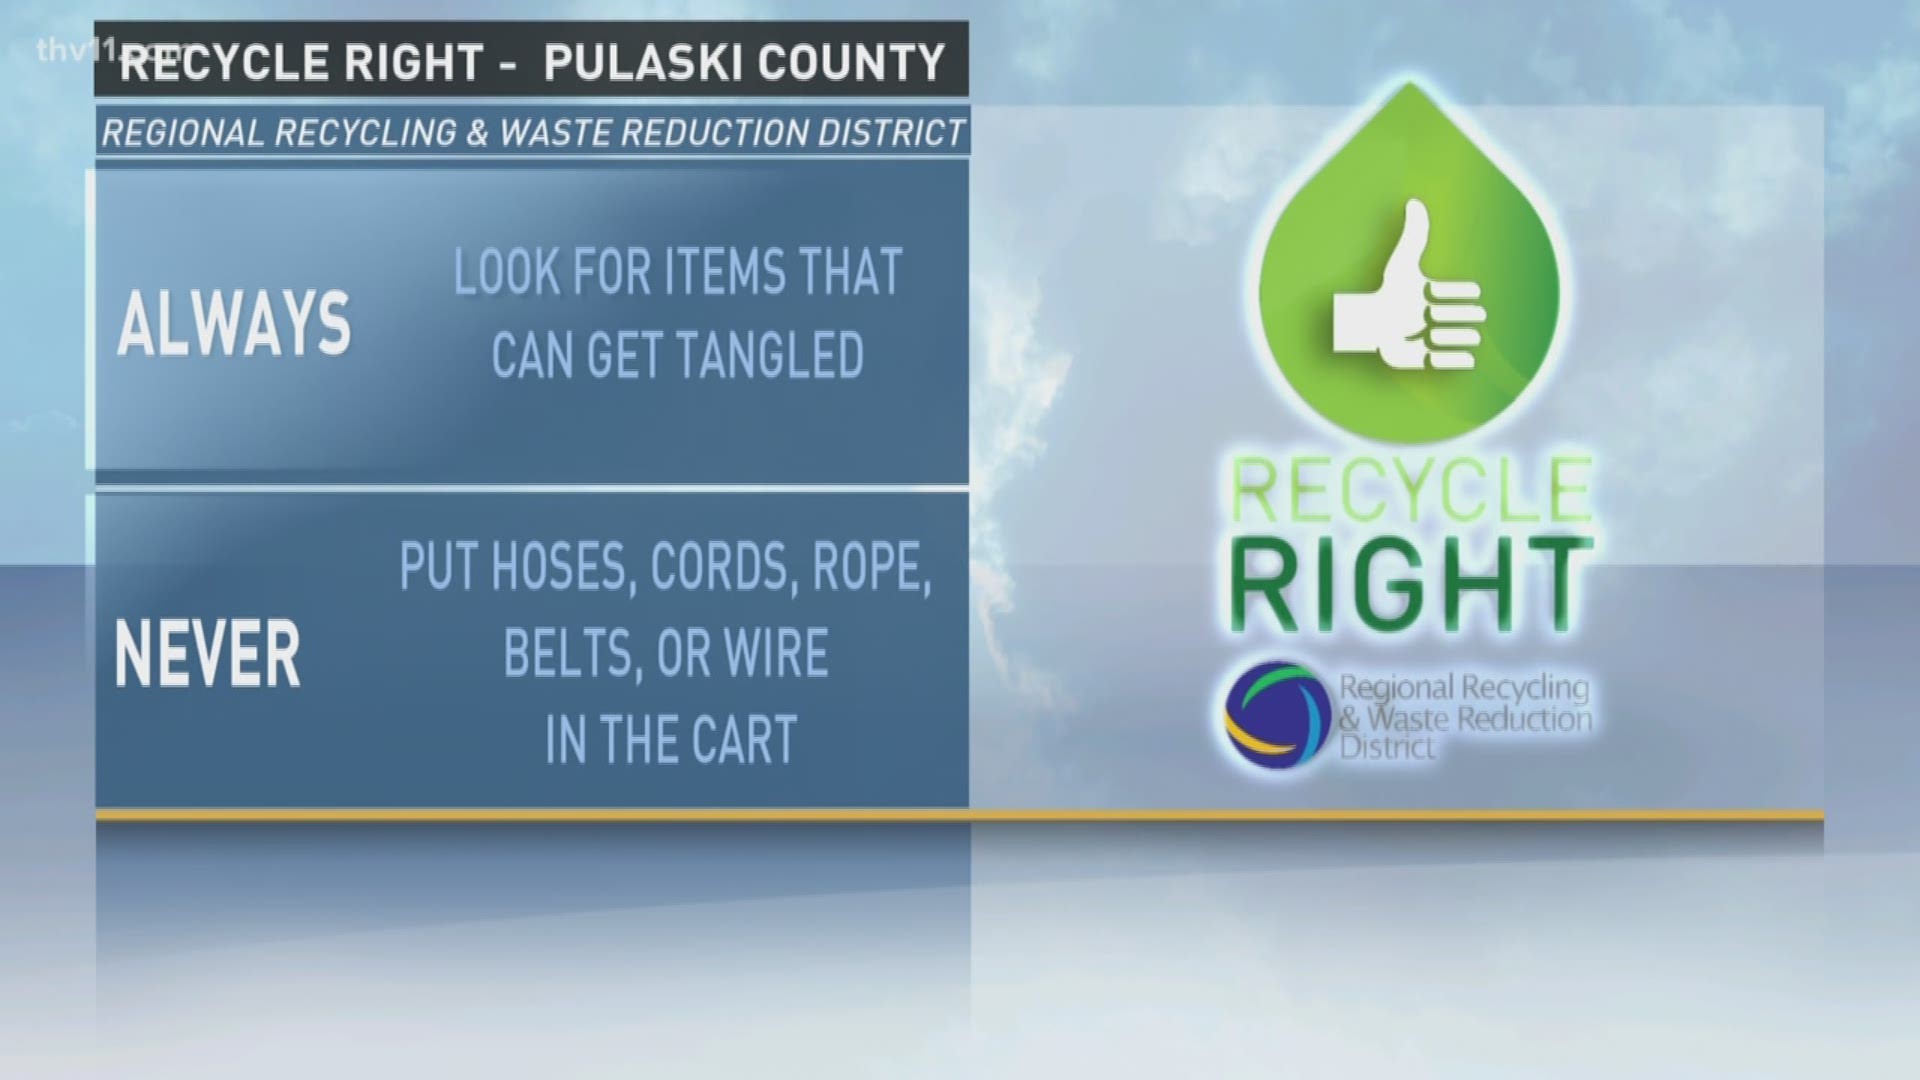 Meteorologist Mariel Ruiz has your week two tip for Recycle Right.